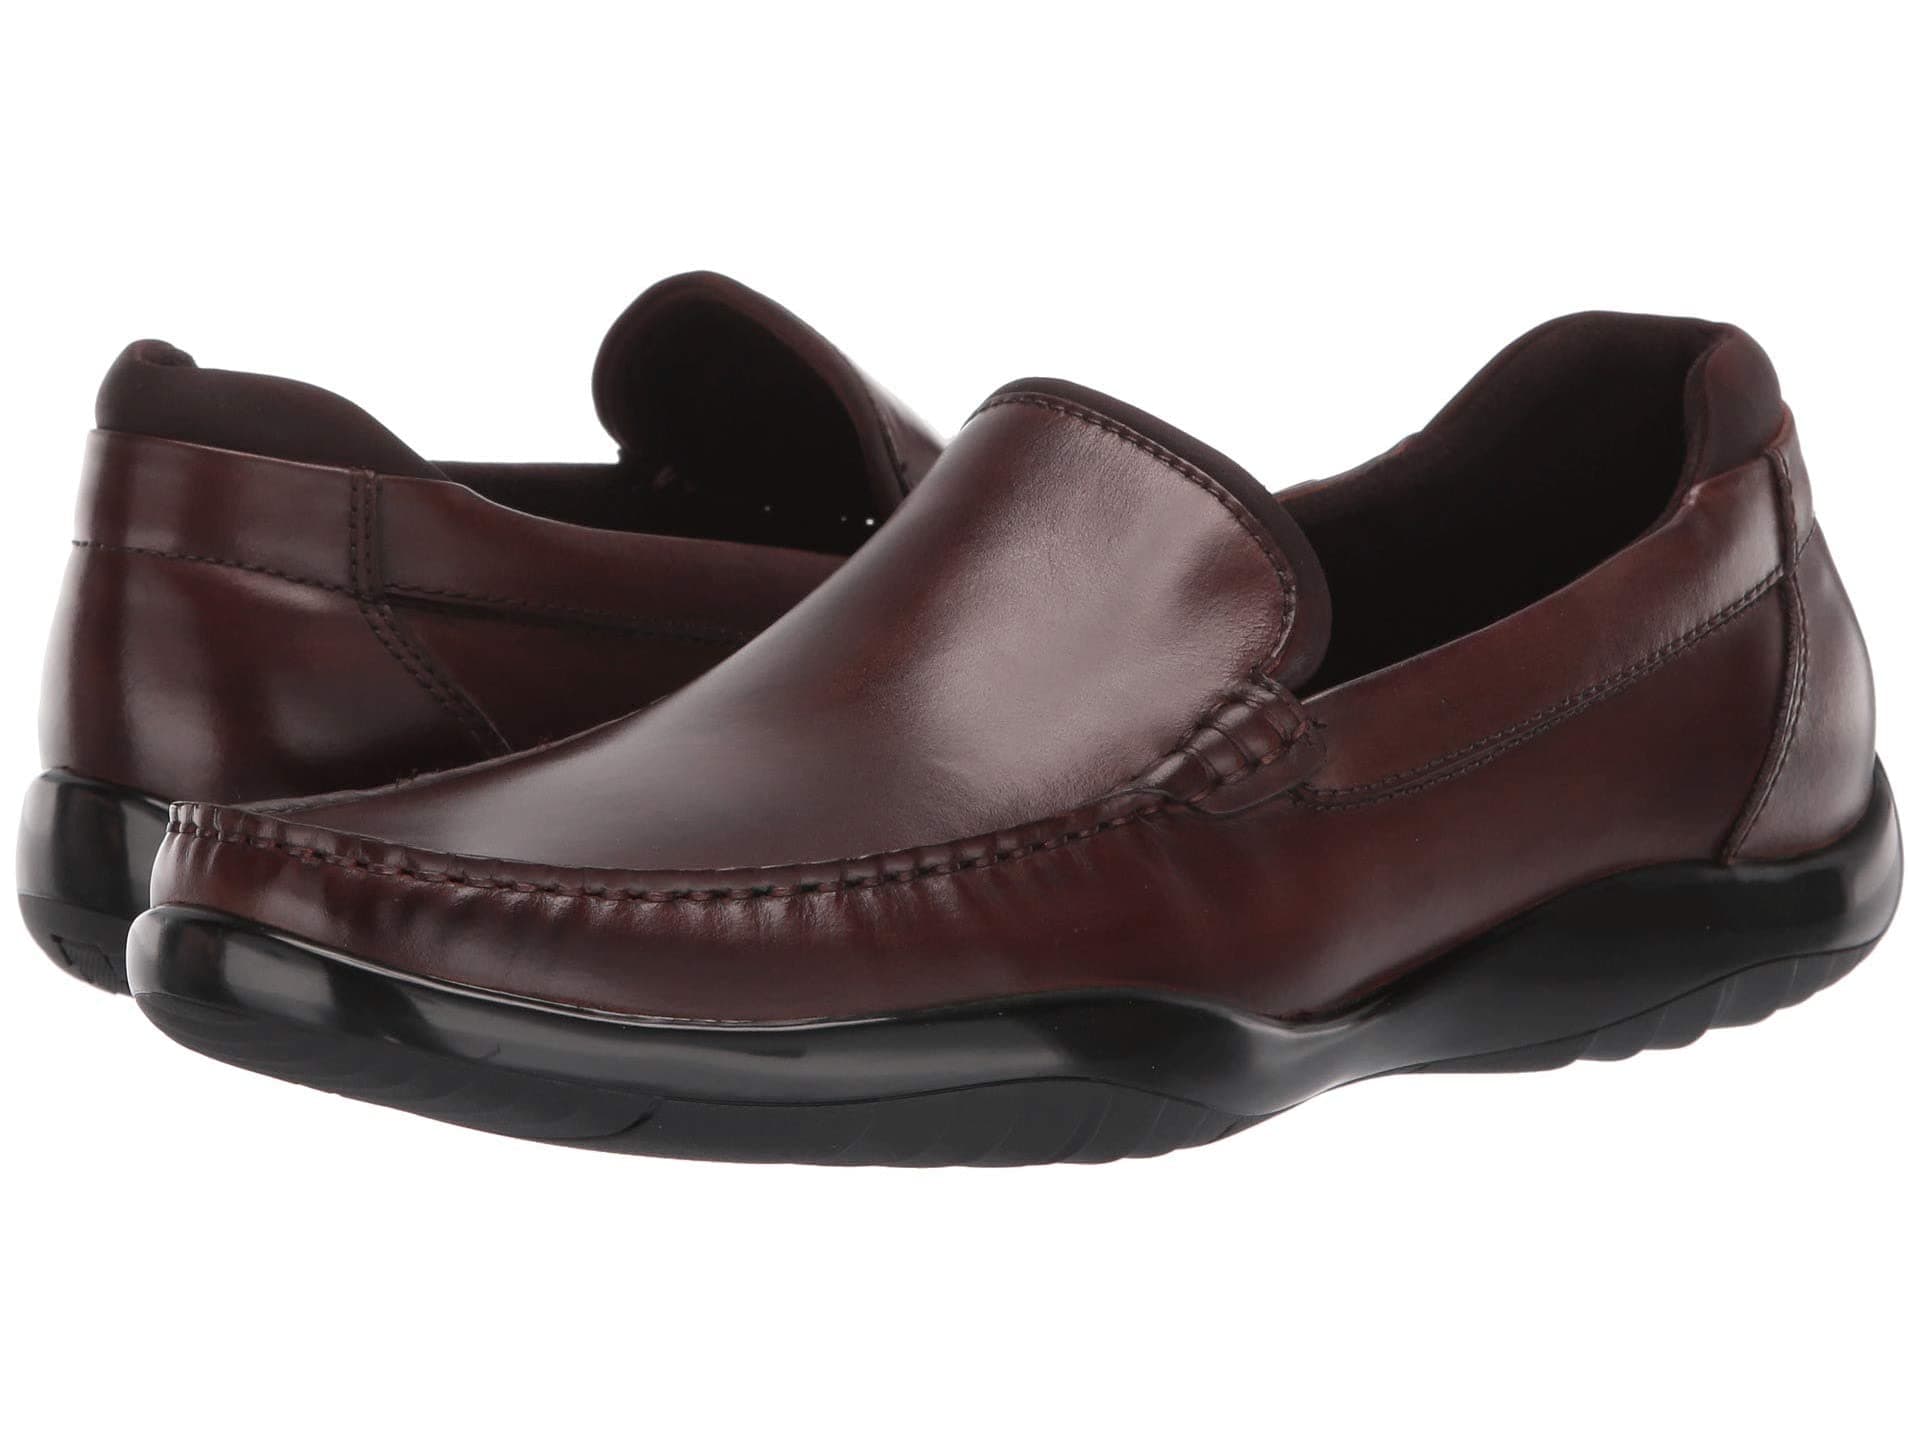 woocommerce-673321-2209615.cloudwaysapps.com-kenneth-cole-new-york-mens-brown-leather-motion-flex-driver-loafers